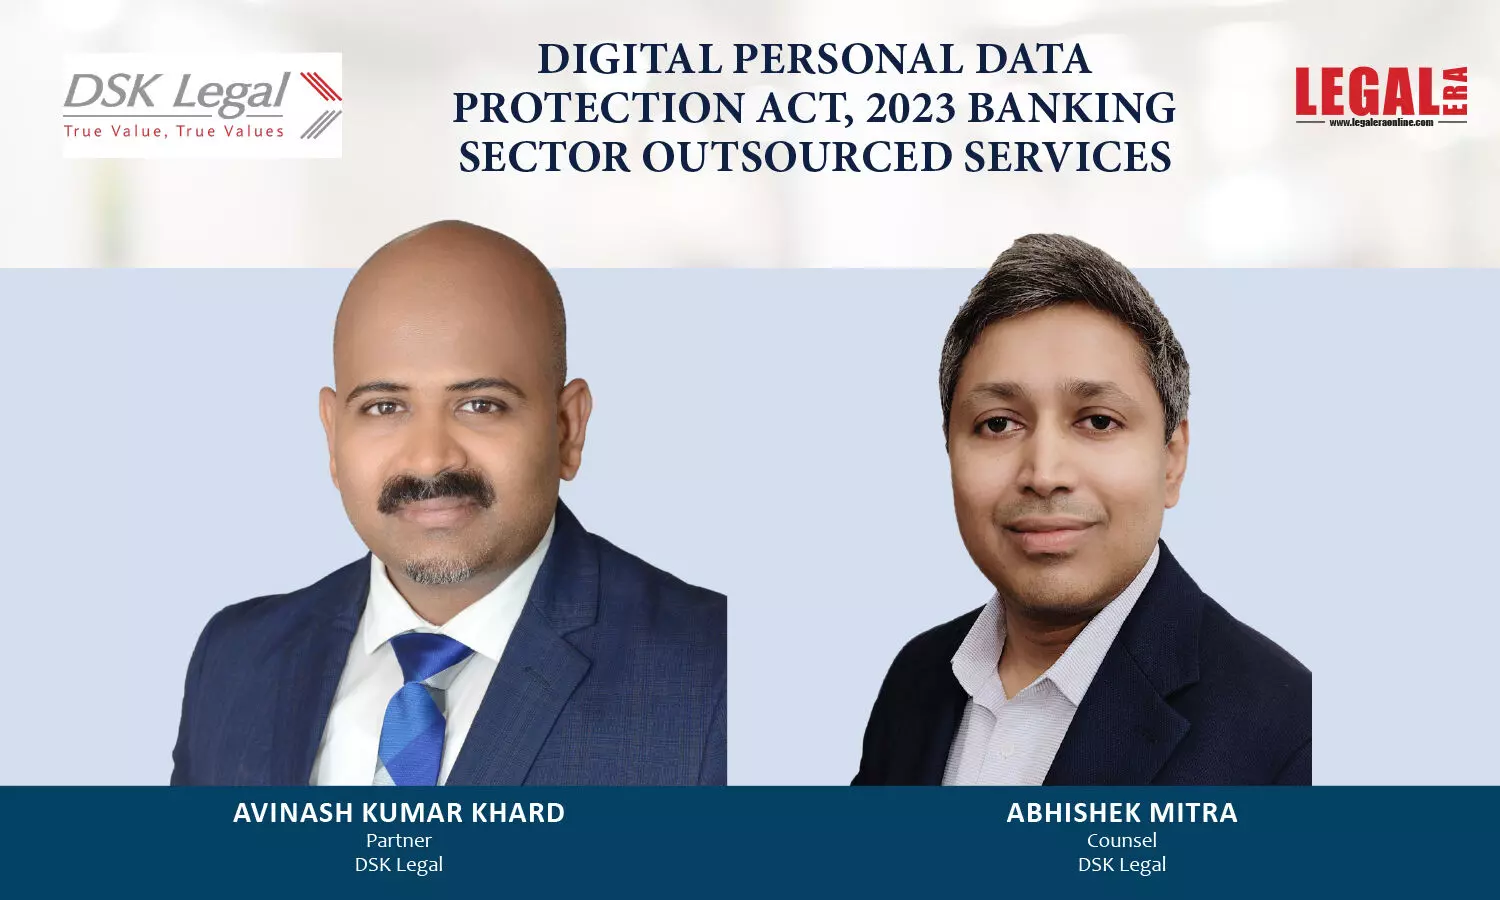 Digital Personal Data Protection Act, 2023 Banking Sector Outsourced Services